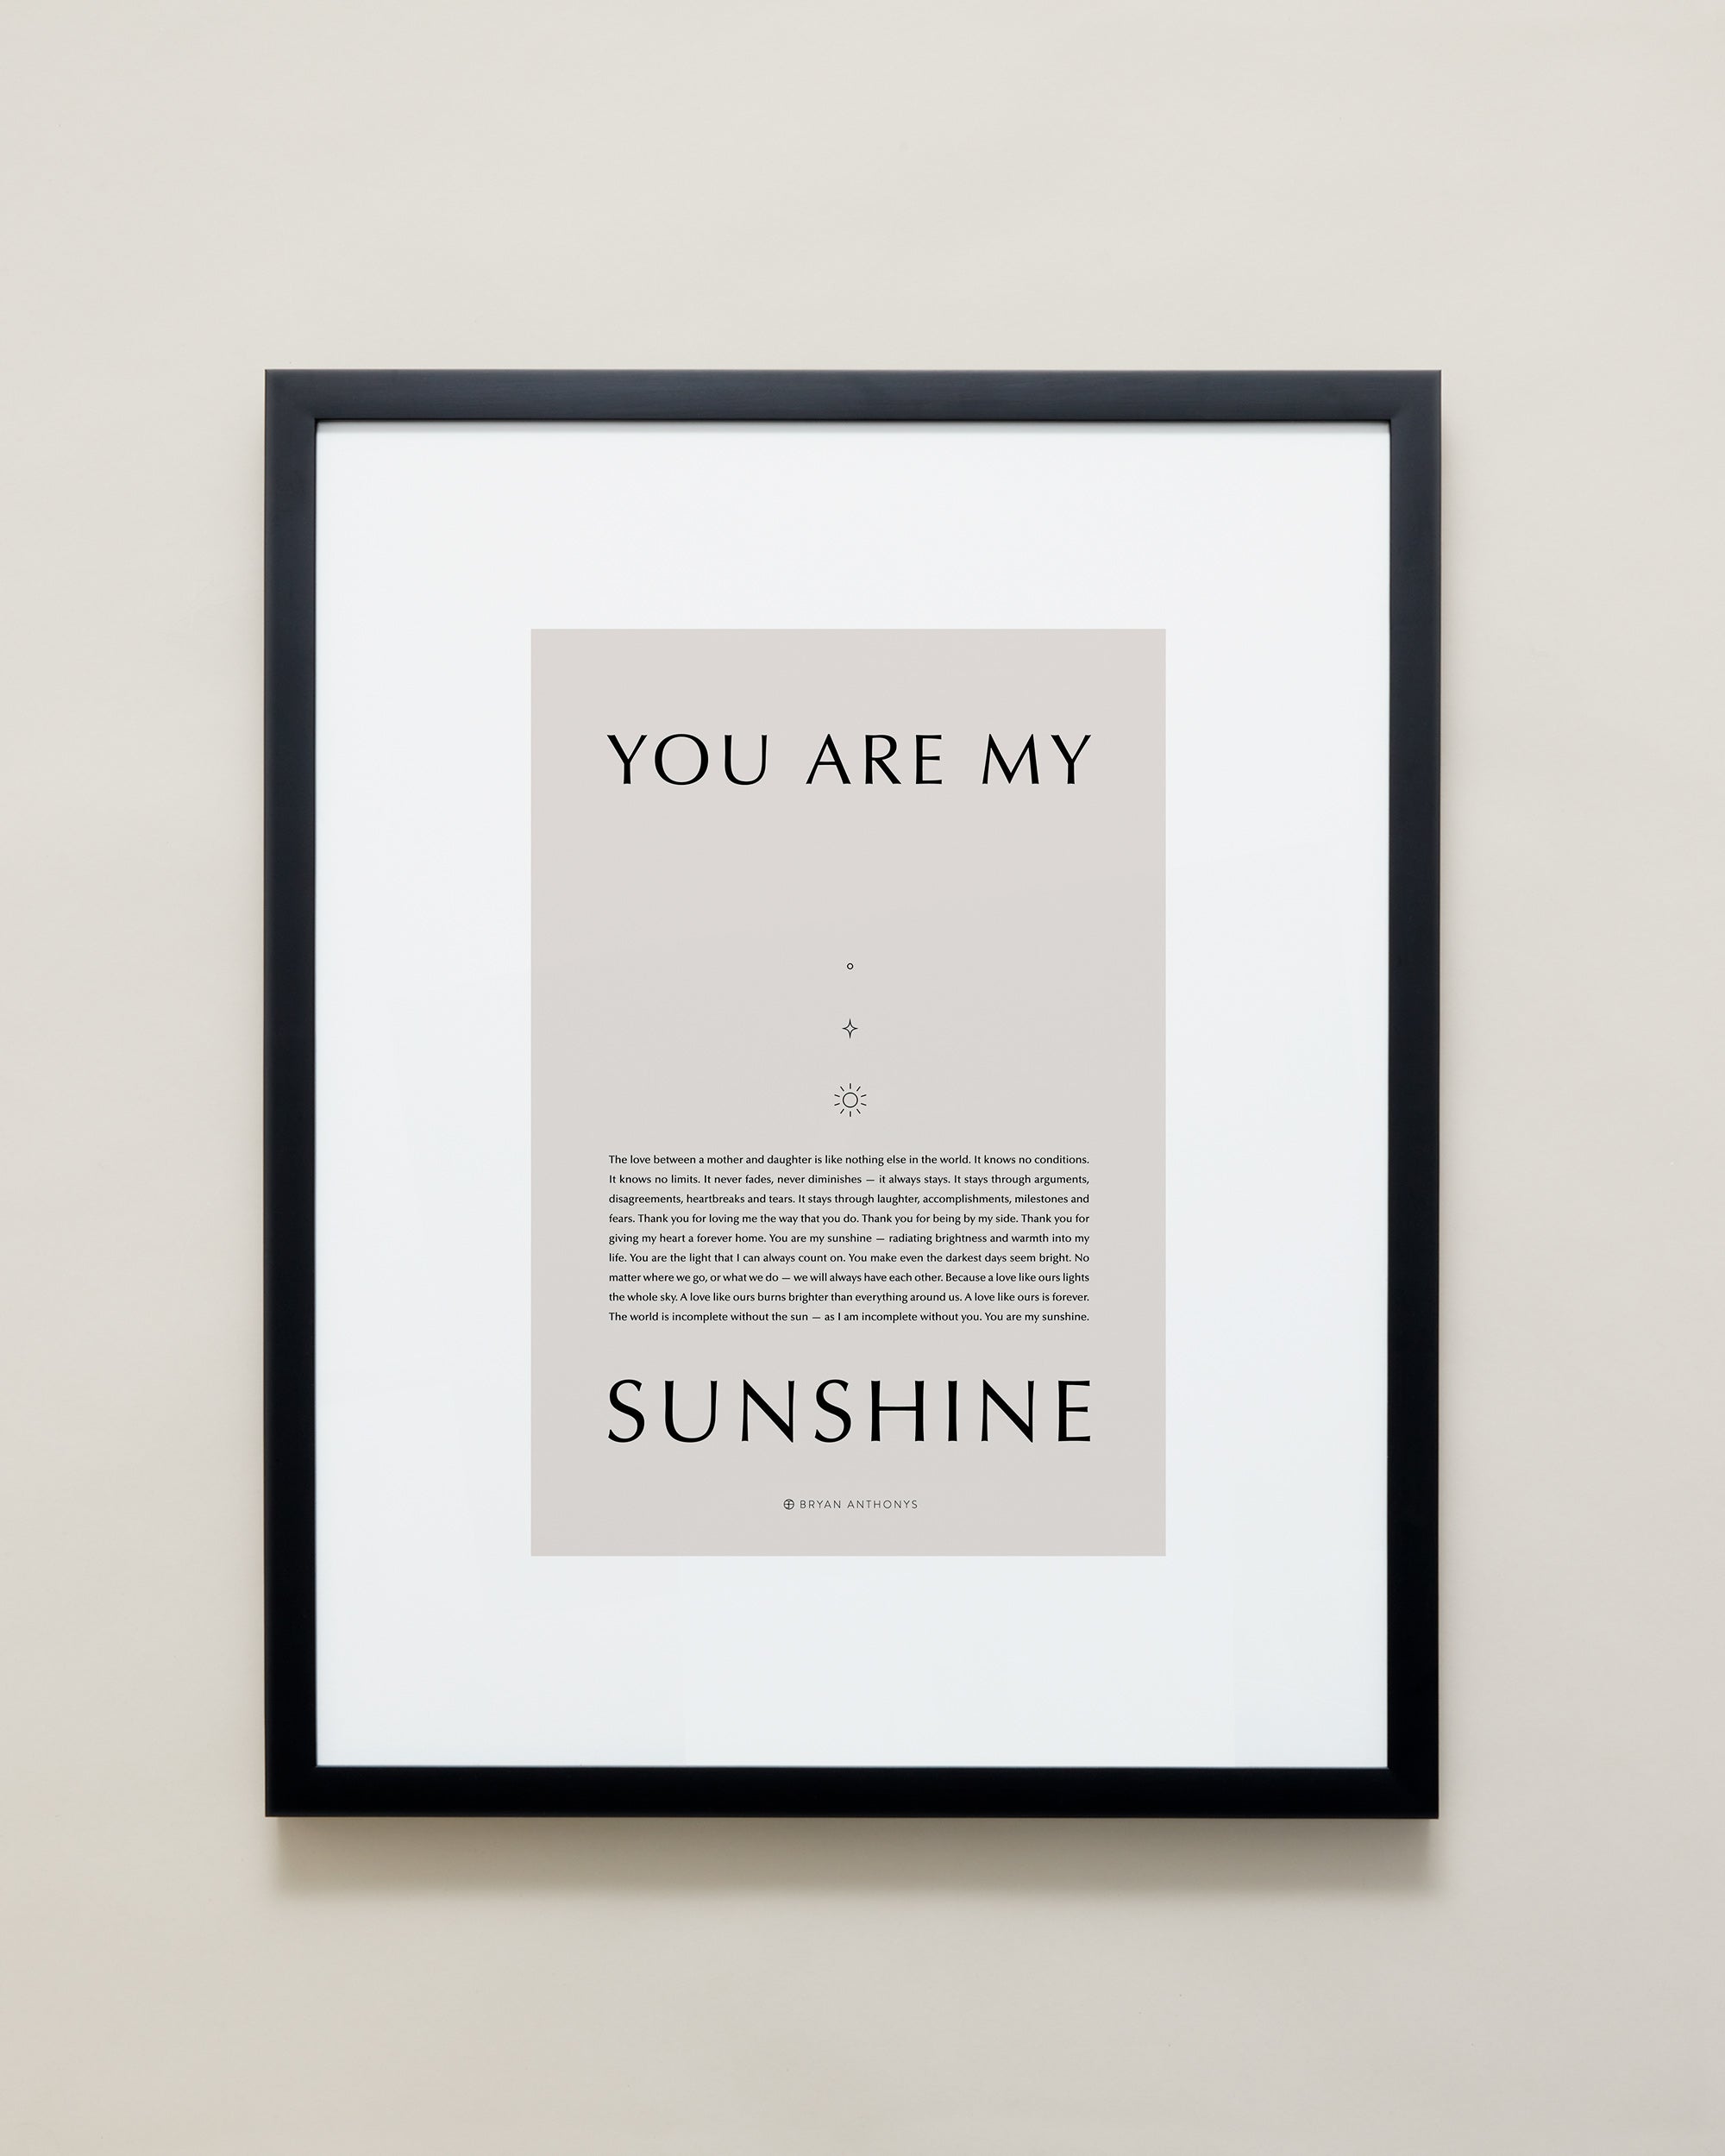 Bryan Anthonys Home Decor Purposeful Prints You Are My Sunshine Iconic Framed Print Tan Art With Black Frame 16x20